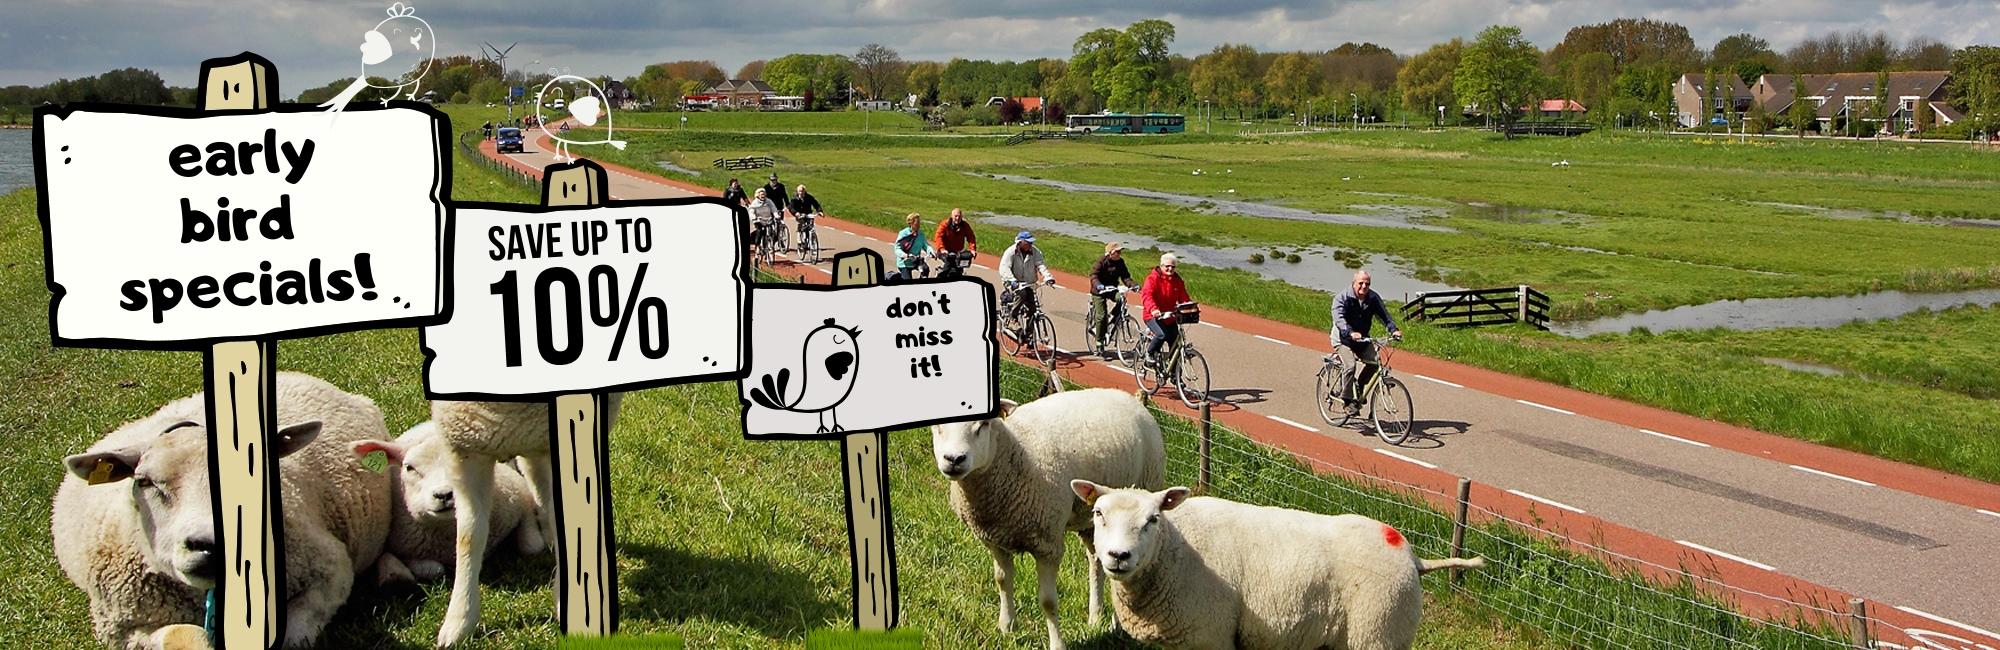 Offers cycling tours in The Netherlands